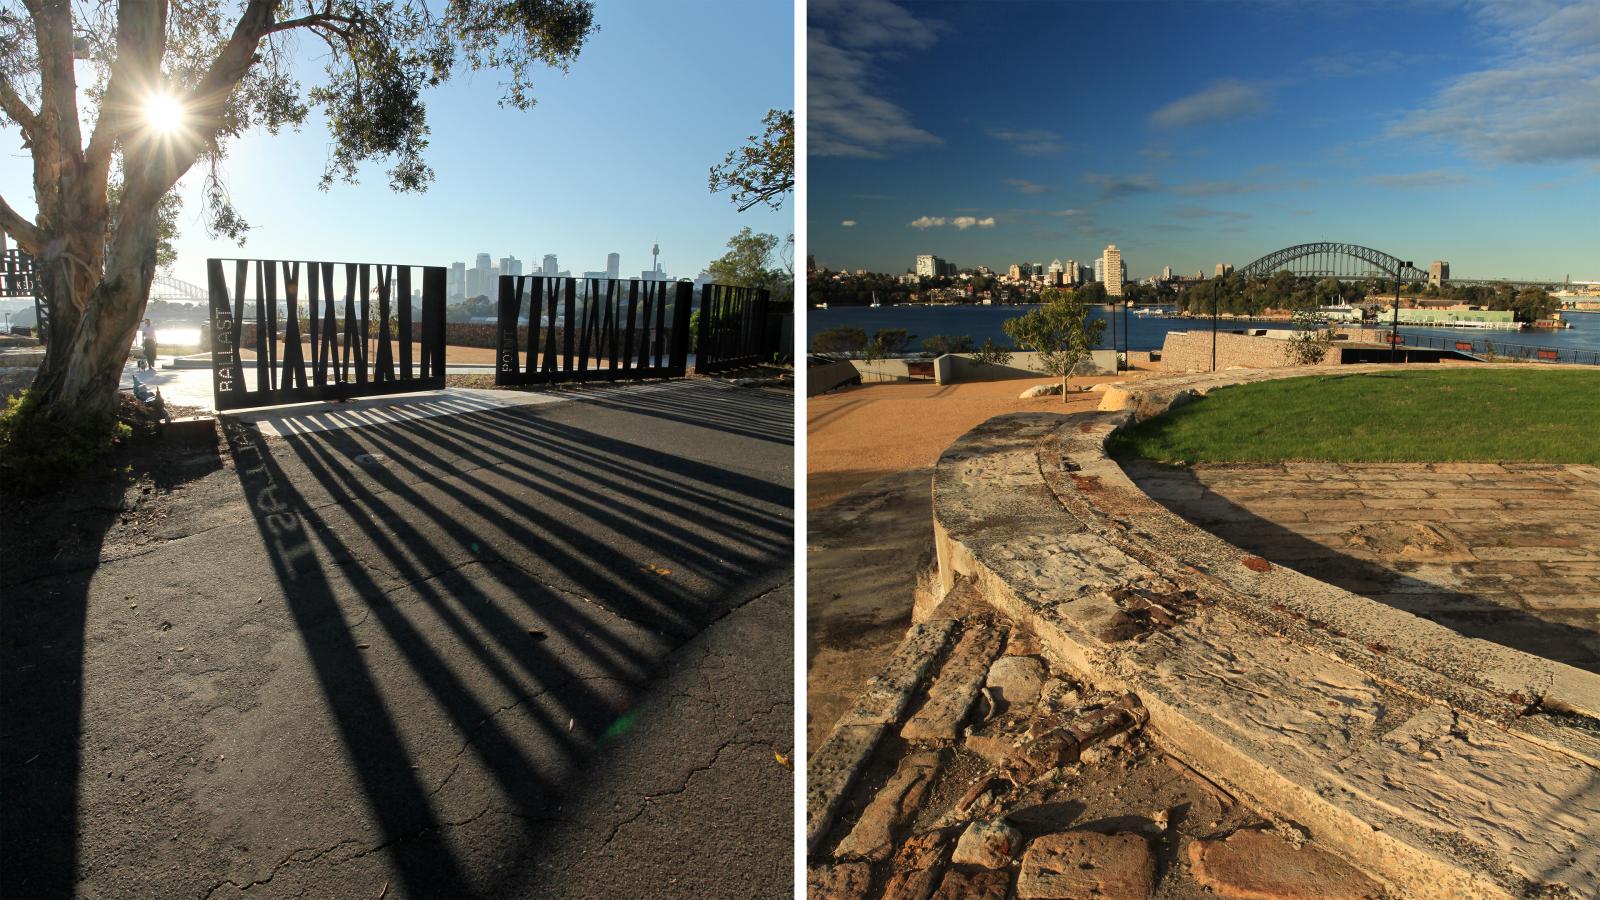 Split image: Left side shows sun shining through tree and shadows of tall fence onto the road, with city skyline visible in the distance. Right side displays a curved stone structure at Ballast Point Park, on a grassy area overlooking a large body of water with a bridge and city buildings in the background.